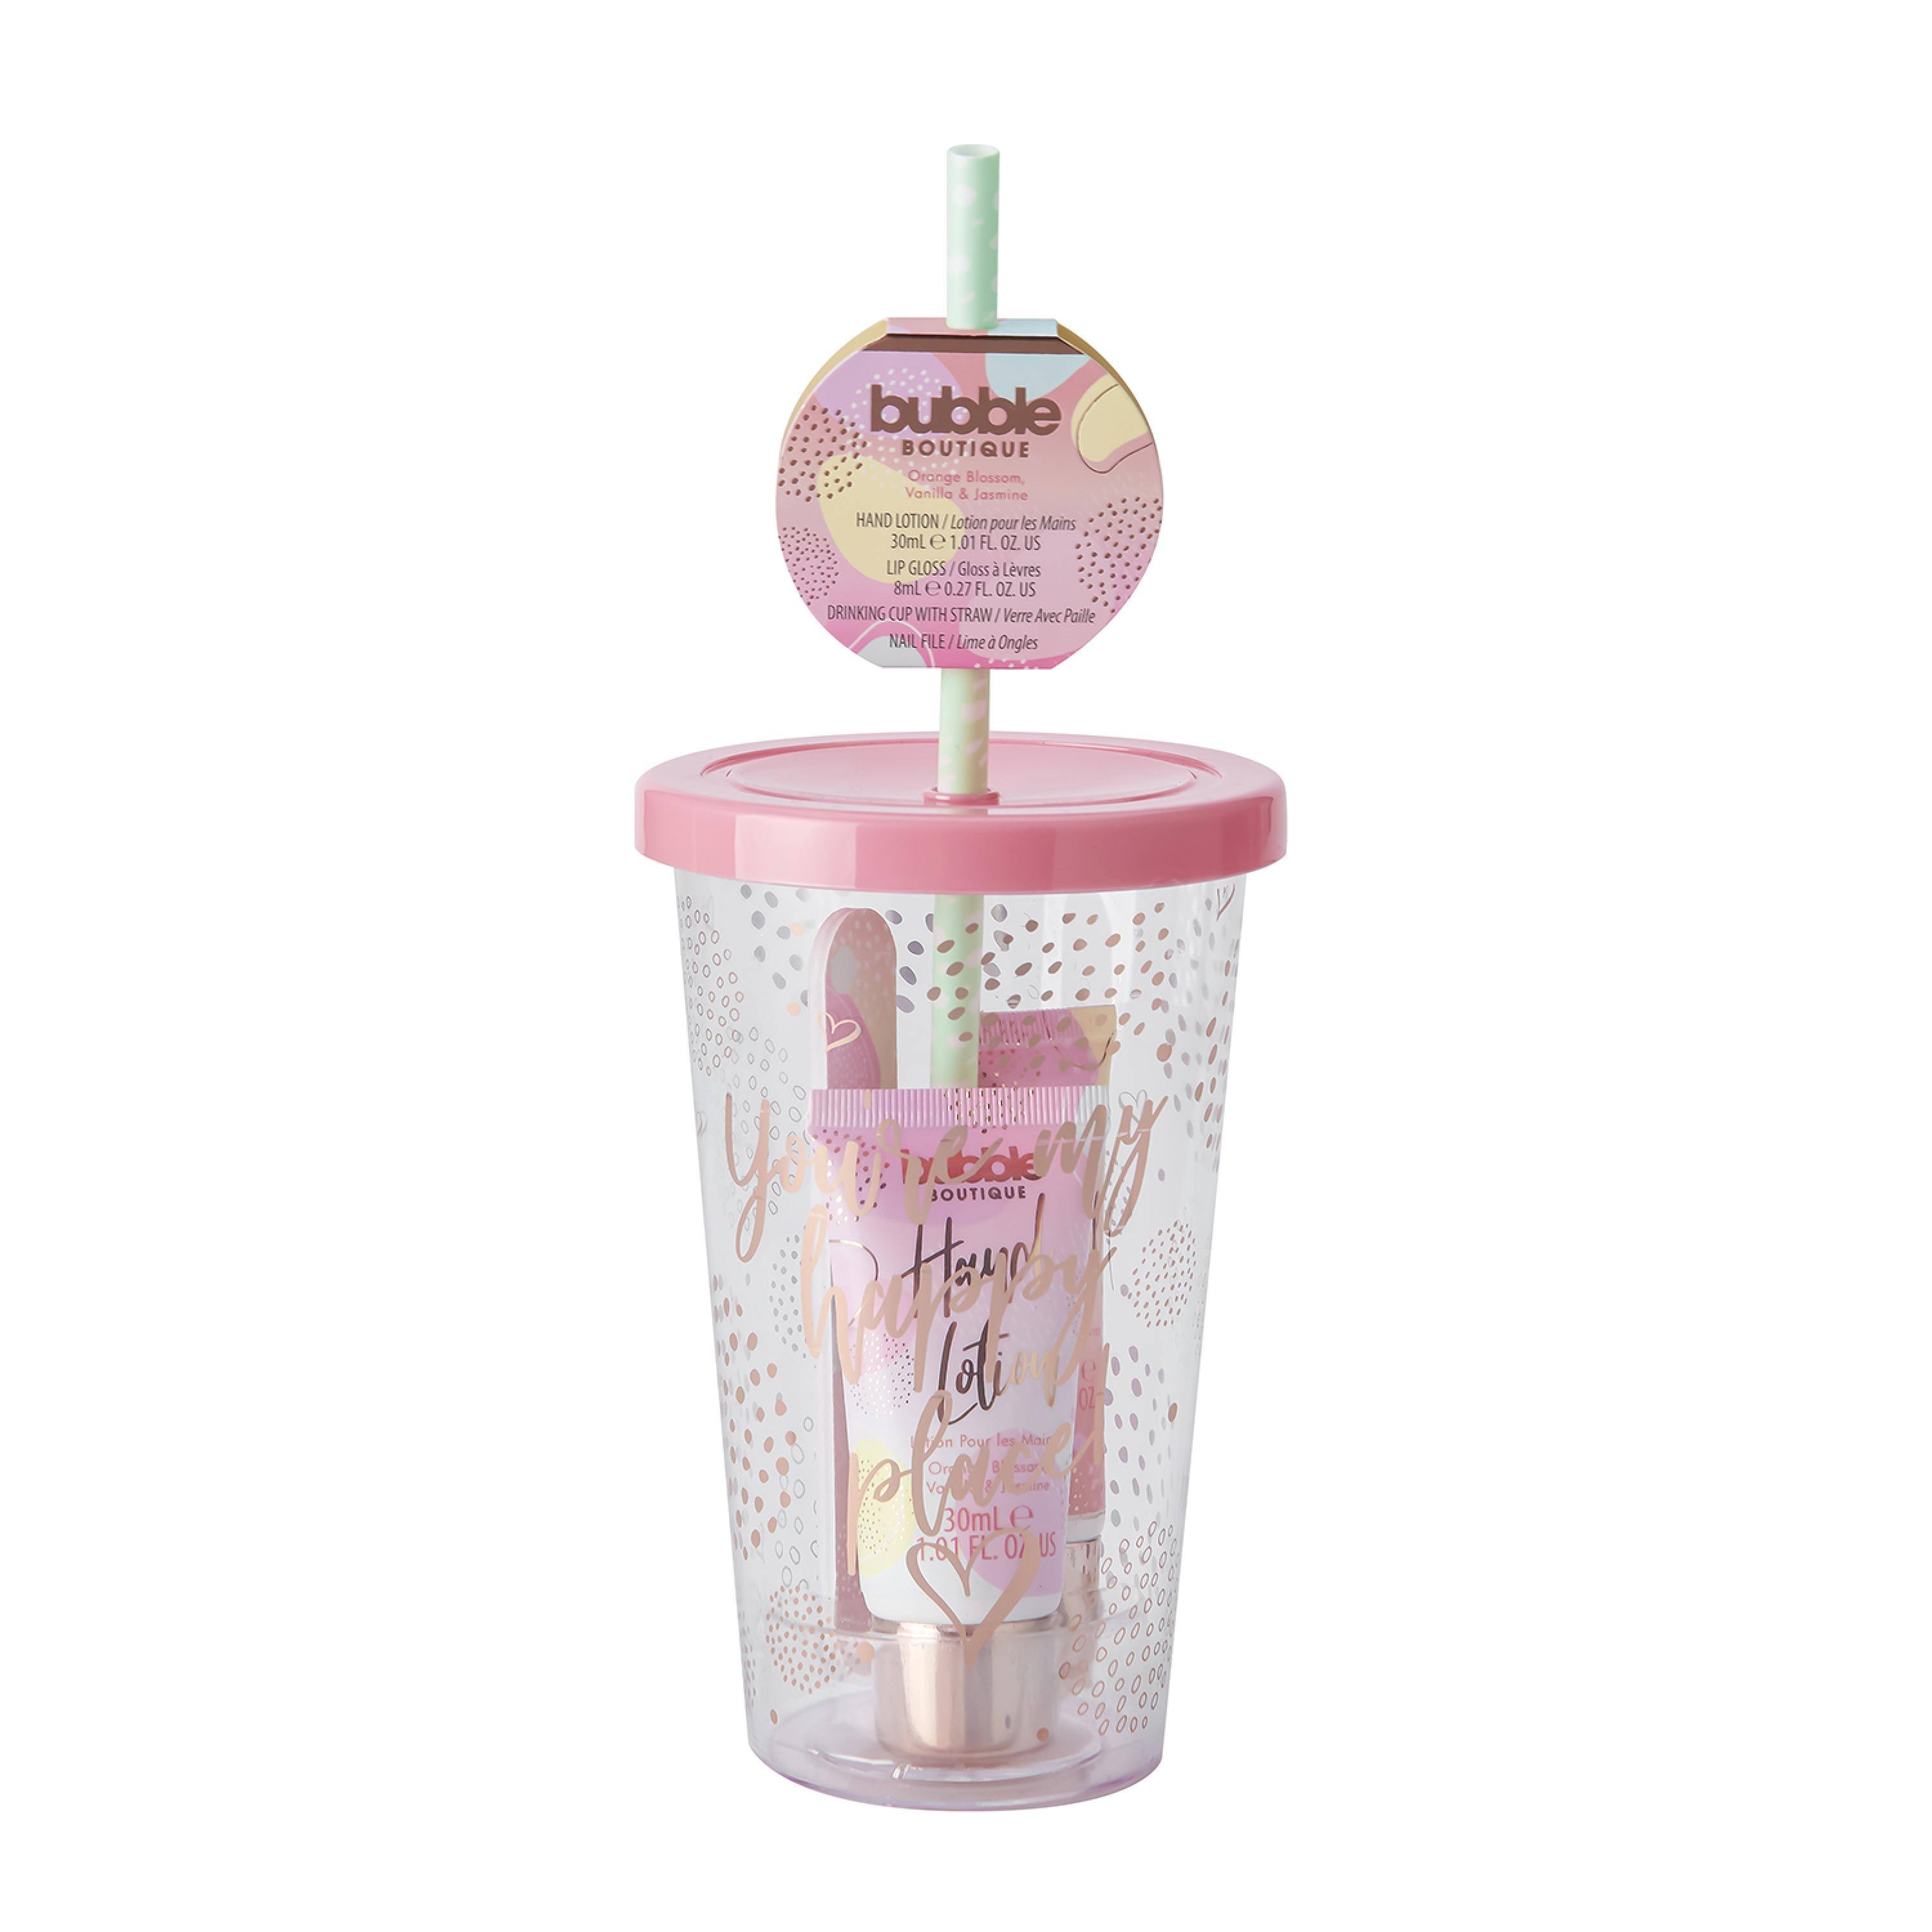 Style & Grace Bubble Boutique Travel Cup Gift Set 30ml Hand Lotion + 8ml Lip Gloss - Vanilla + Nail File + Drinking Cup with Straw